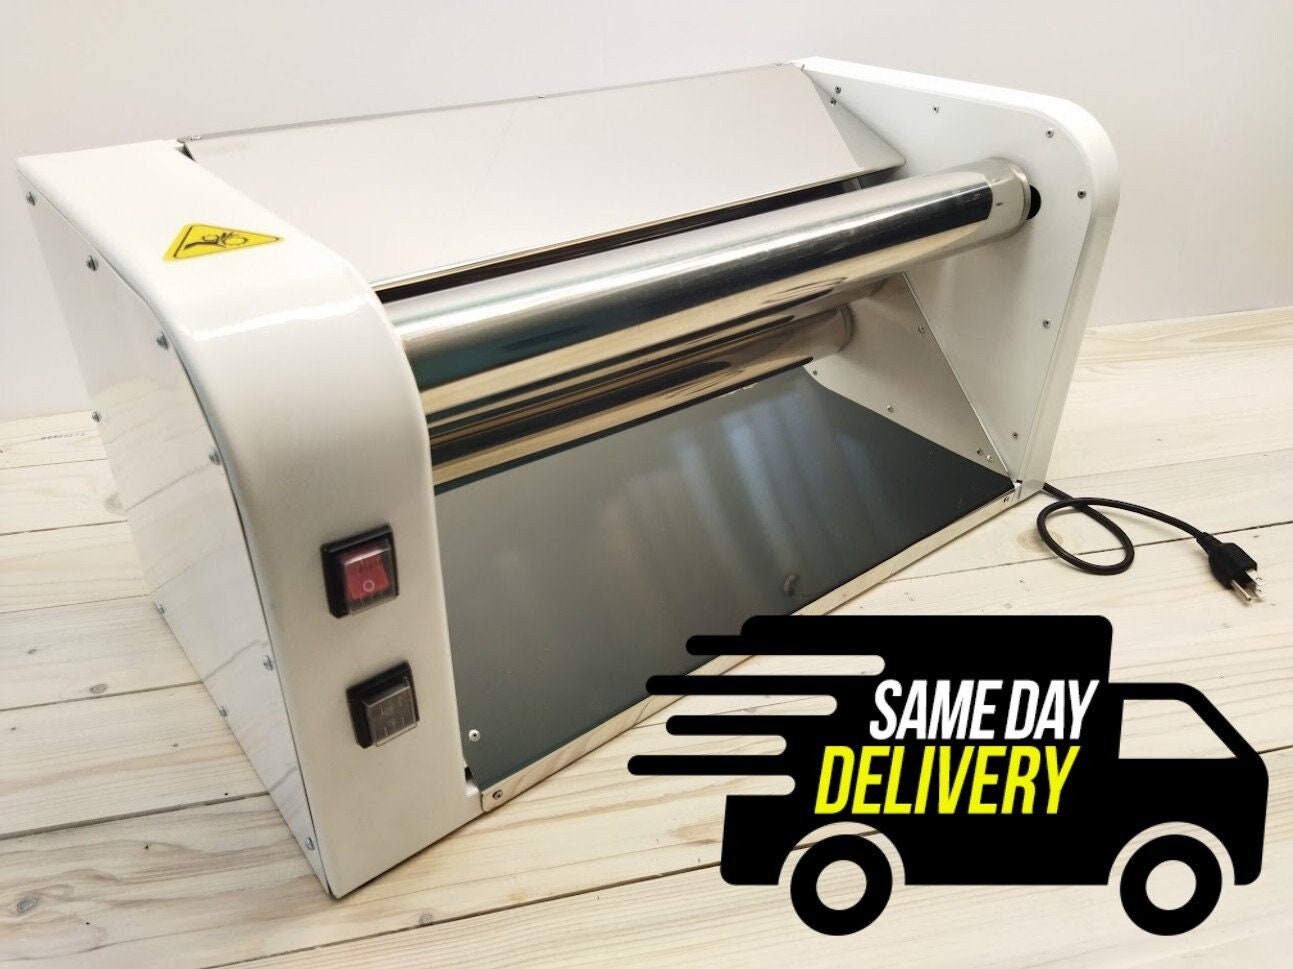 Dough Sheeter 12 Inches, Dough Roller Bakery, Bread, Pizza, Pasta, Pastry, Fondant  Roller, Roti, Raviolis, Cakes, Cookies, Blackfriday Deals 